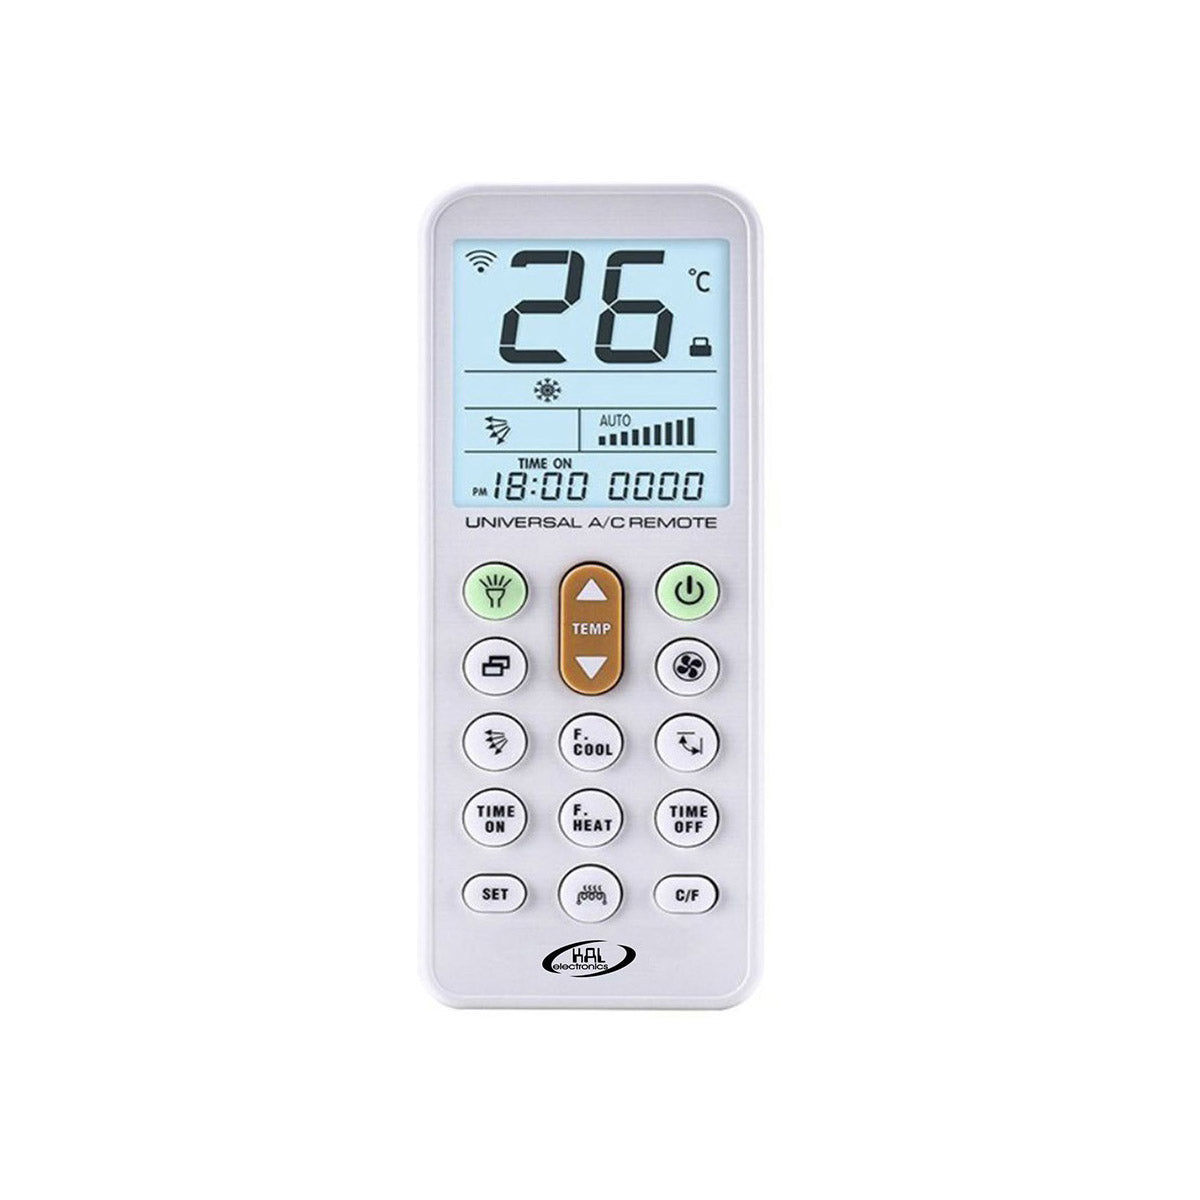 KAL K-2080E Air conditioner multi remote control with 1000 codes KAL Electronics 